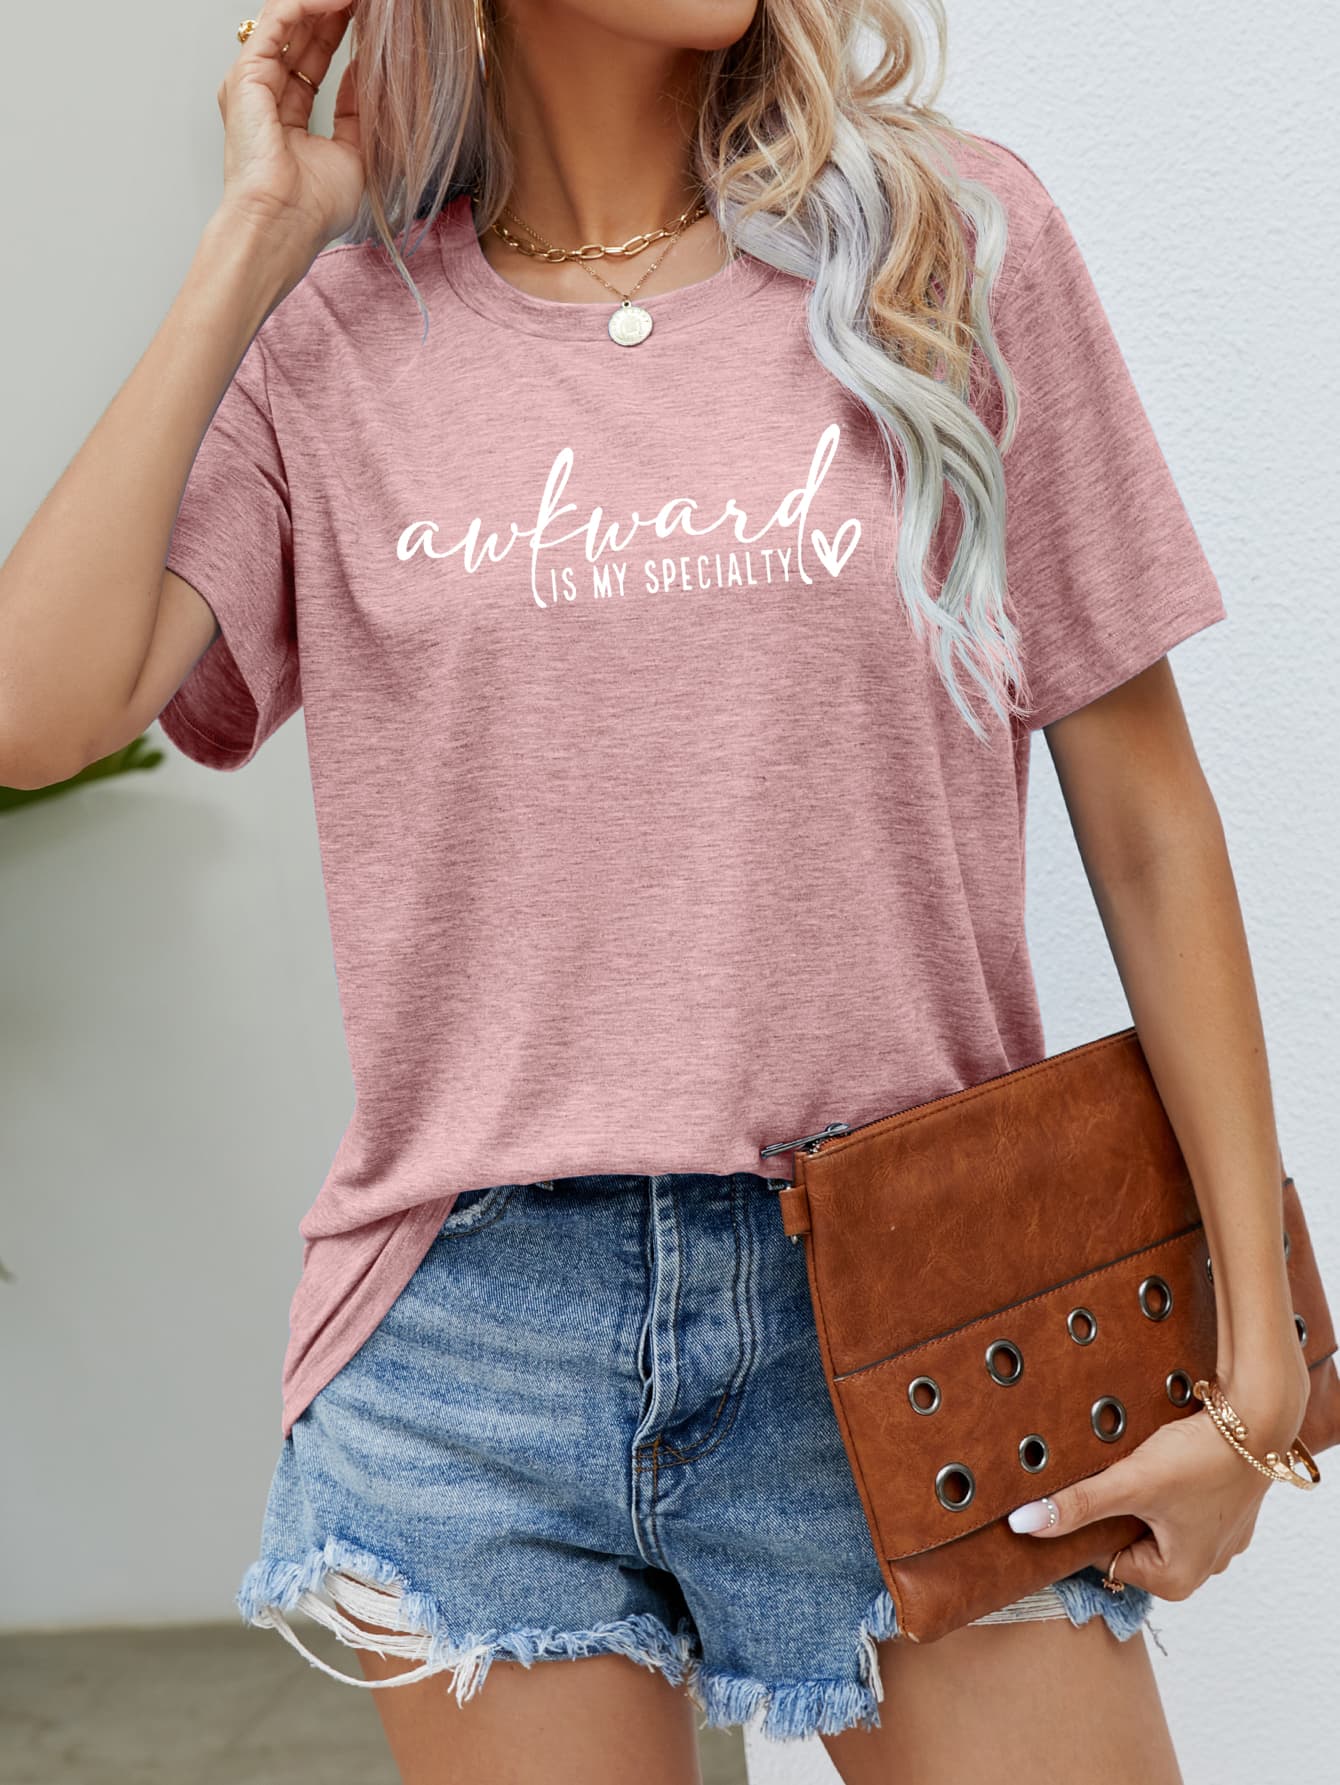 AWKWARD IS MY SPECIALTY Graphic Tee - Pink / S - T-Shirts - Shirts & Tops - 4 - 2024